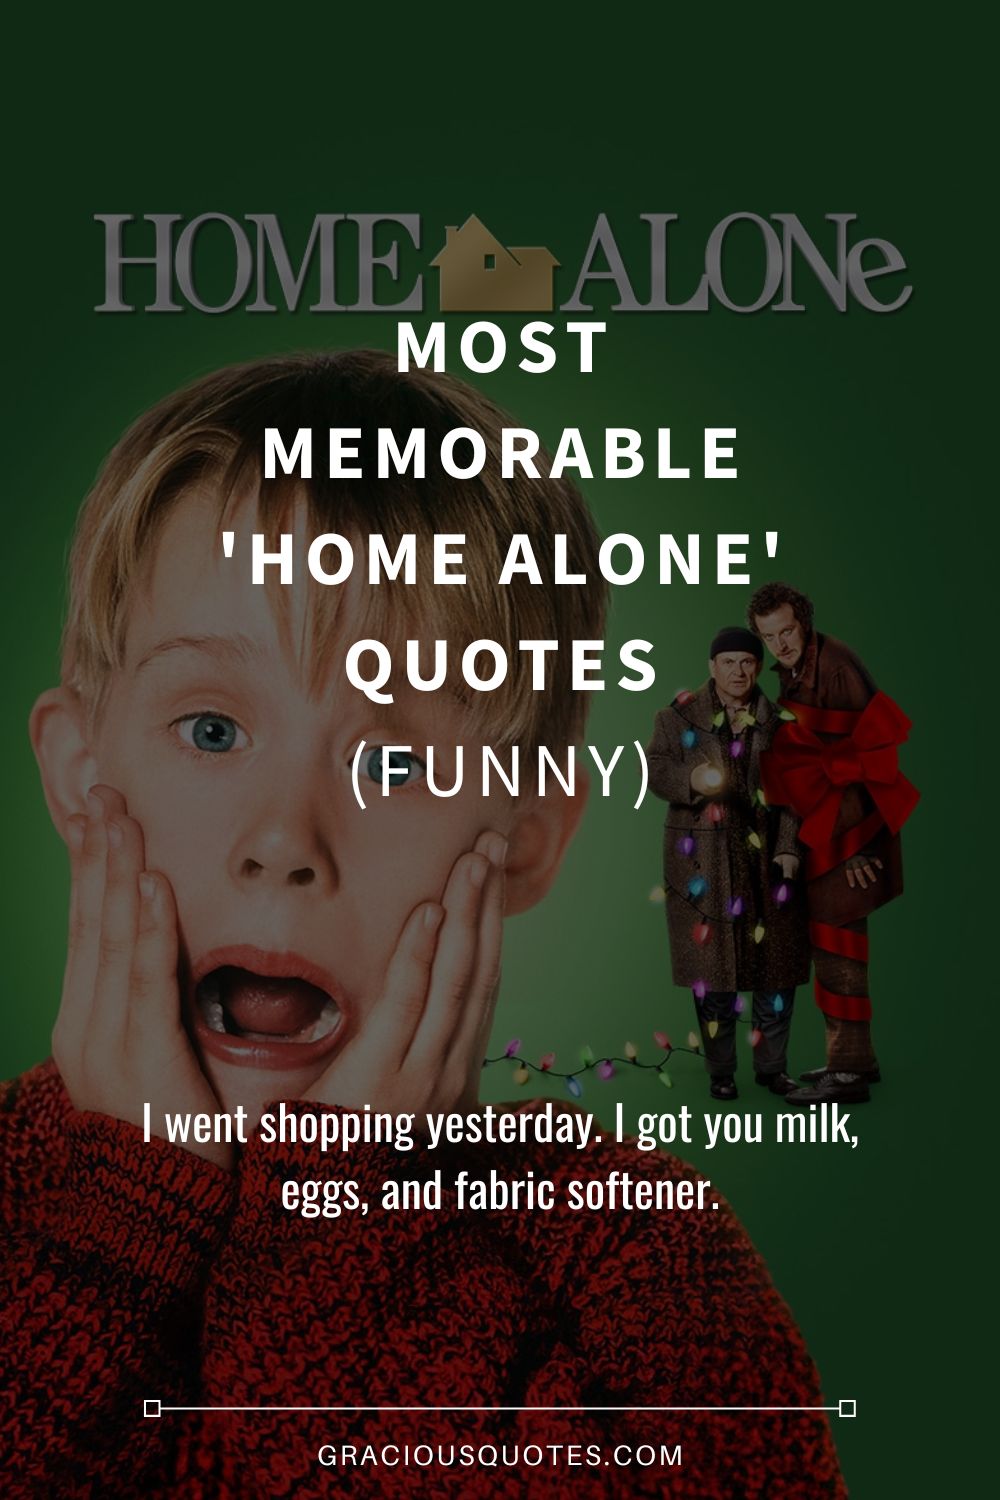 Most Memorable 'Home Alone' Quotes (FUNNY) - Gracious Quotes